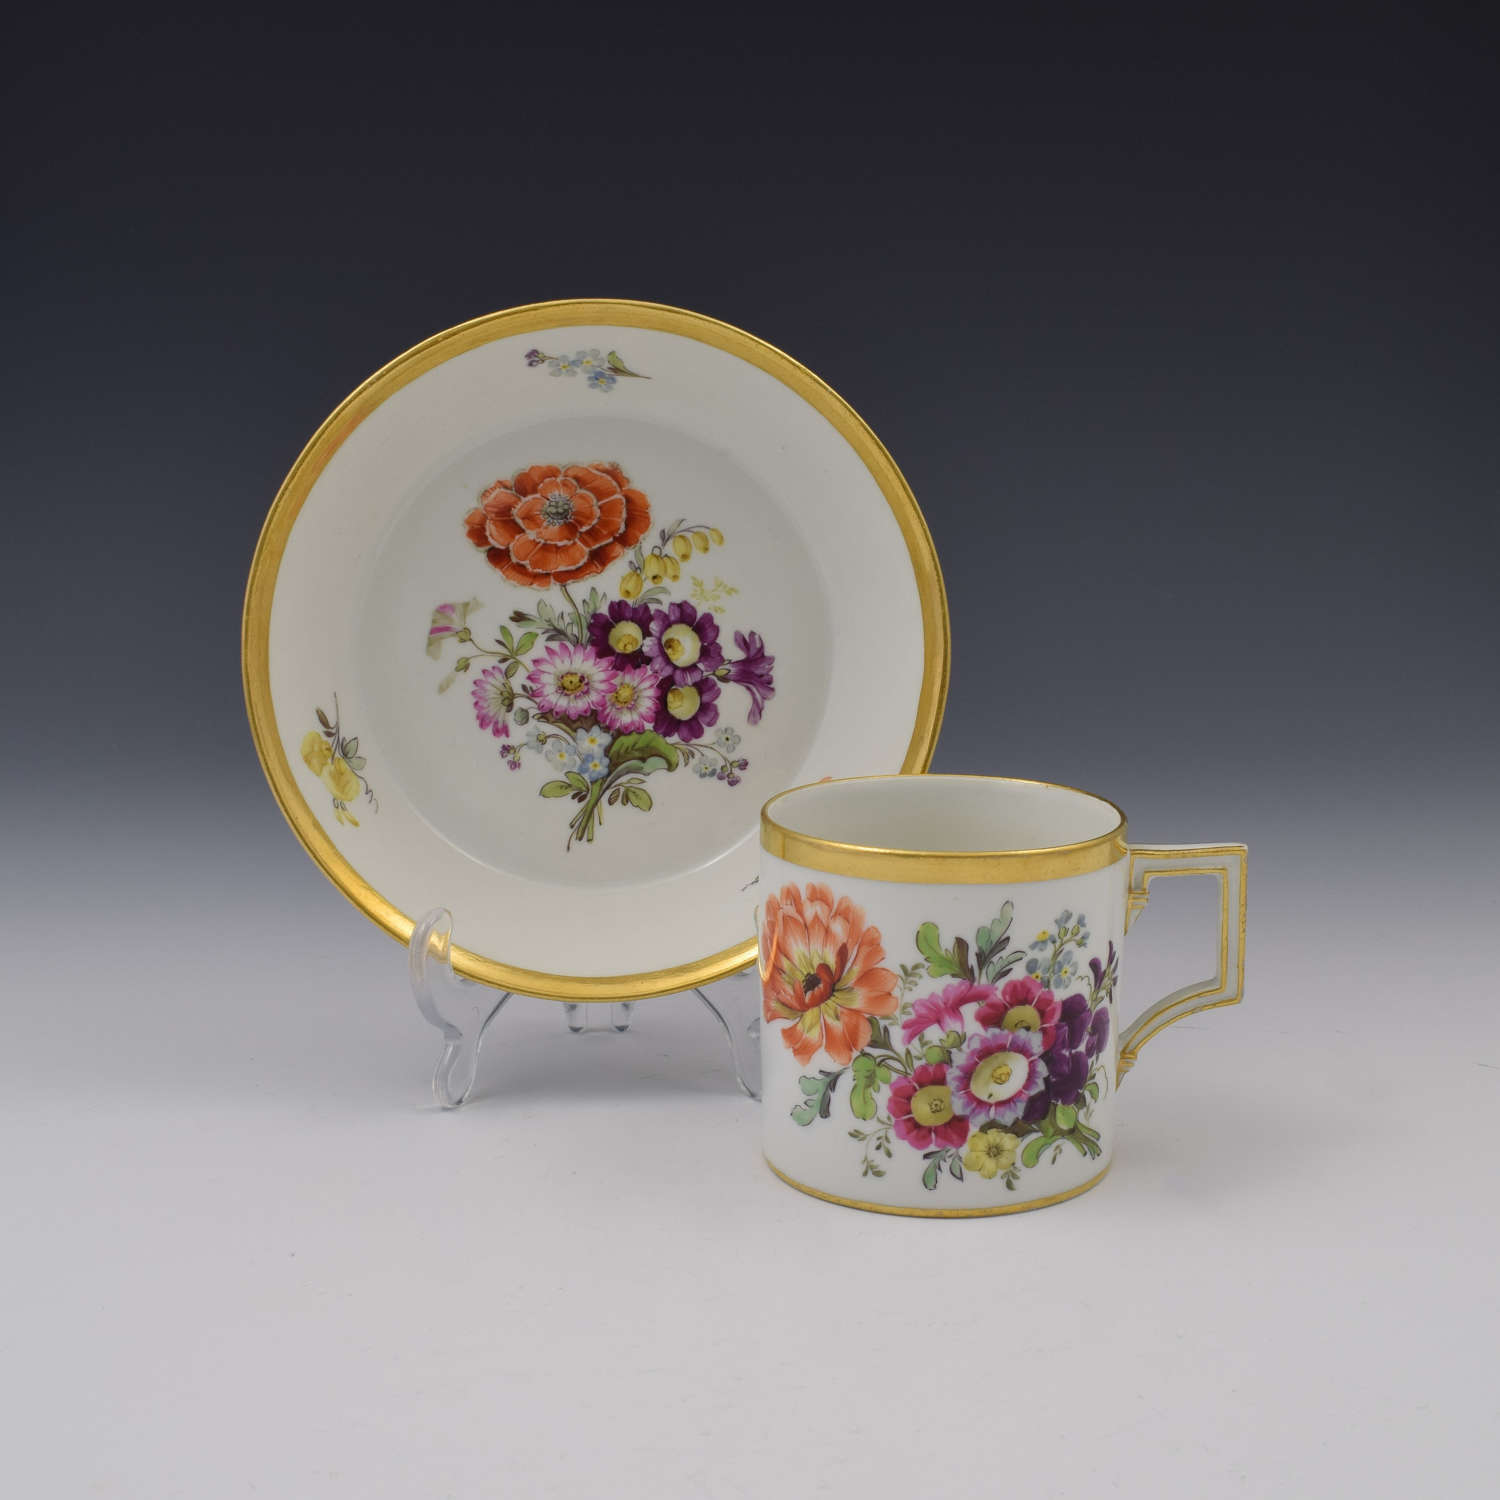 Meissen Marcolini Period Porcelain Coffee Can & Saucer c.1790